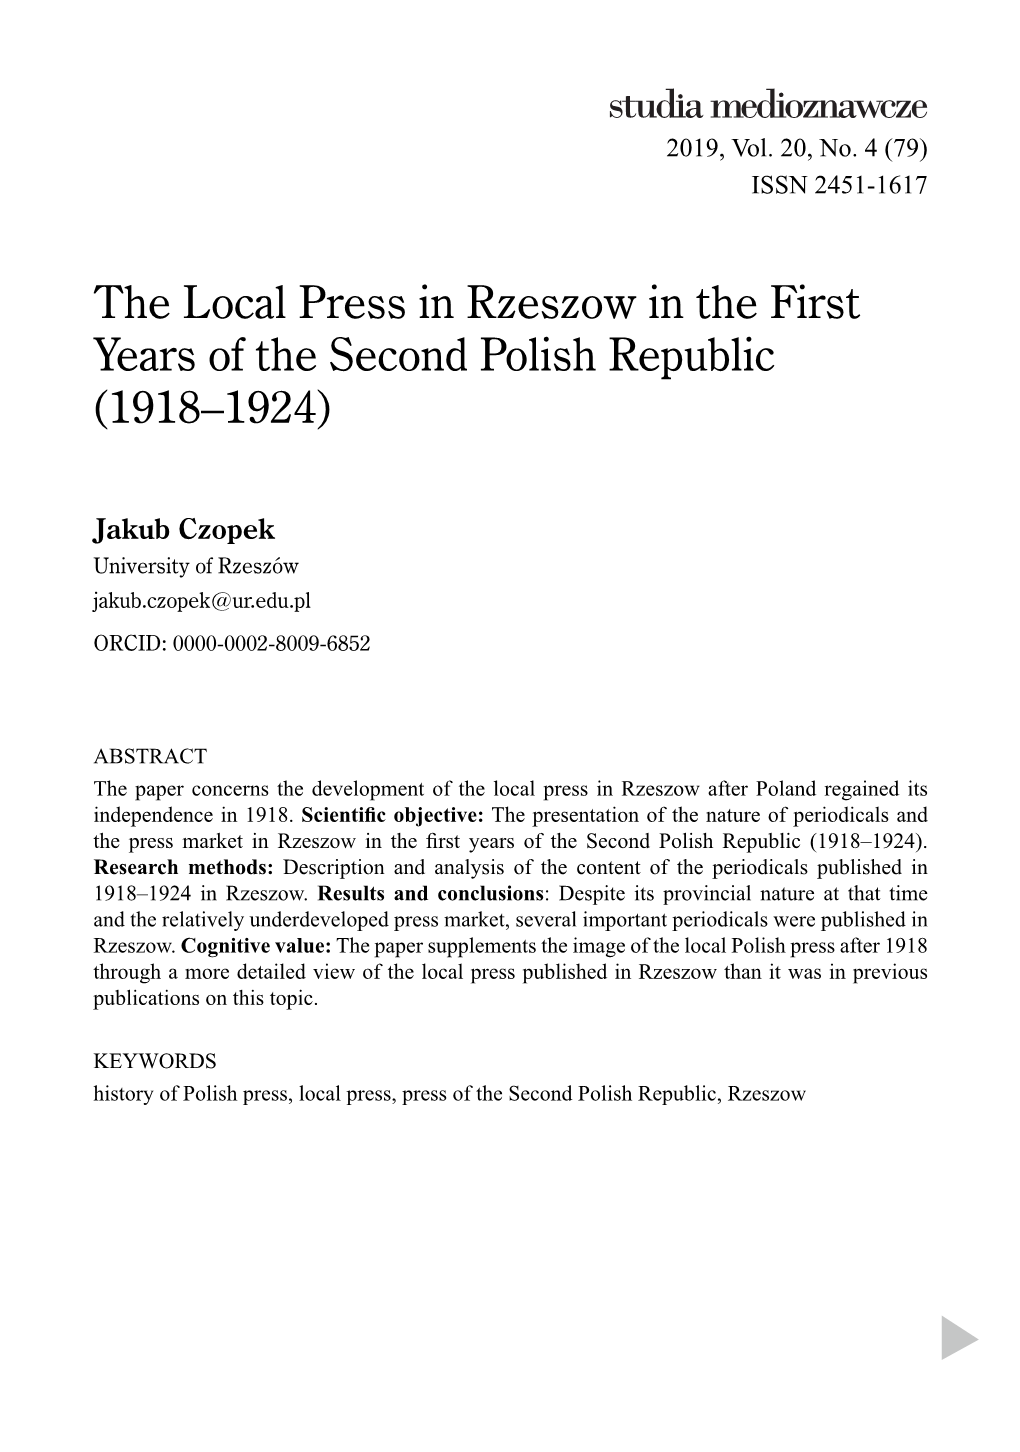 The Local Press in Rzeszow in the First Years of the Second Polish Republic (1918–1924)